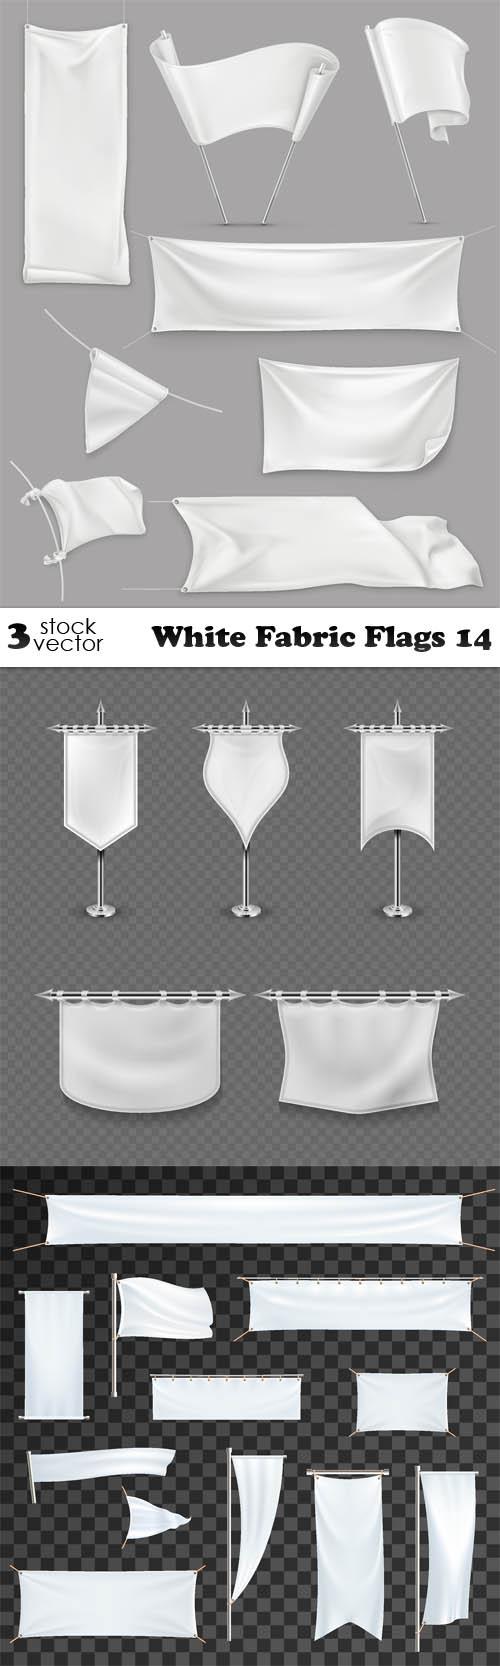 White Fabric Flags 14